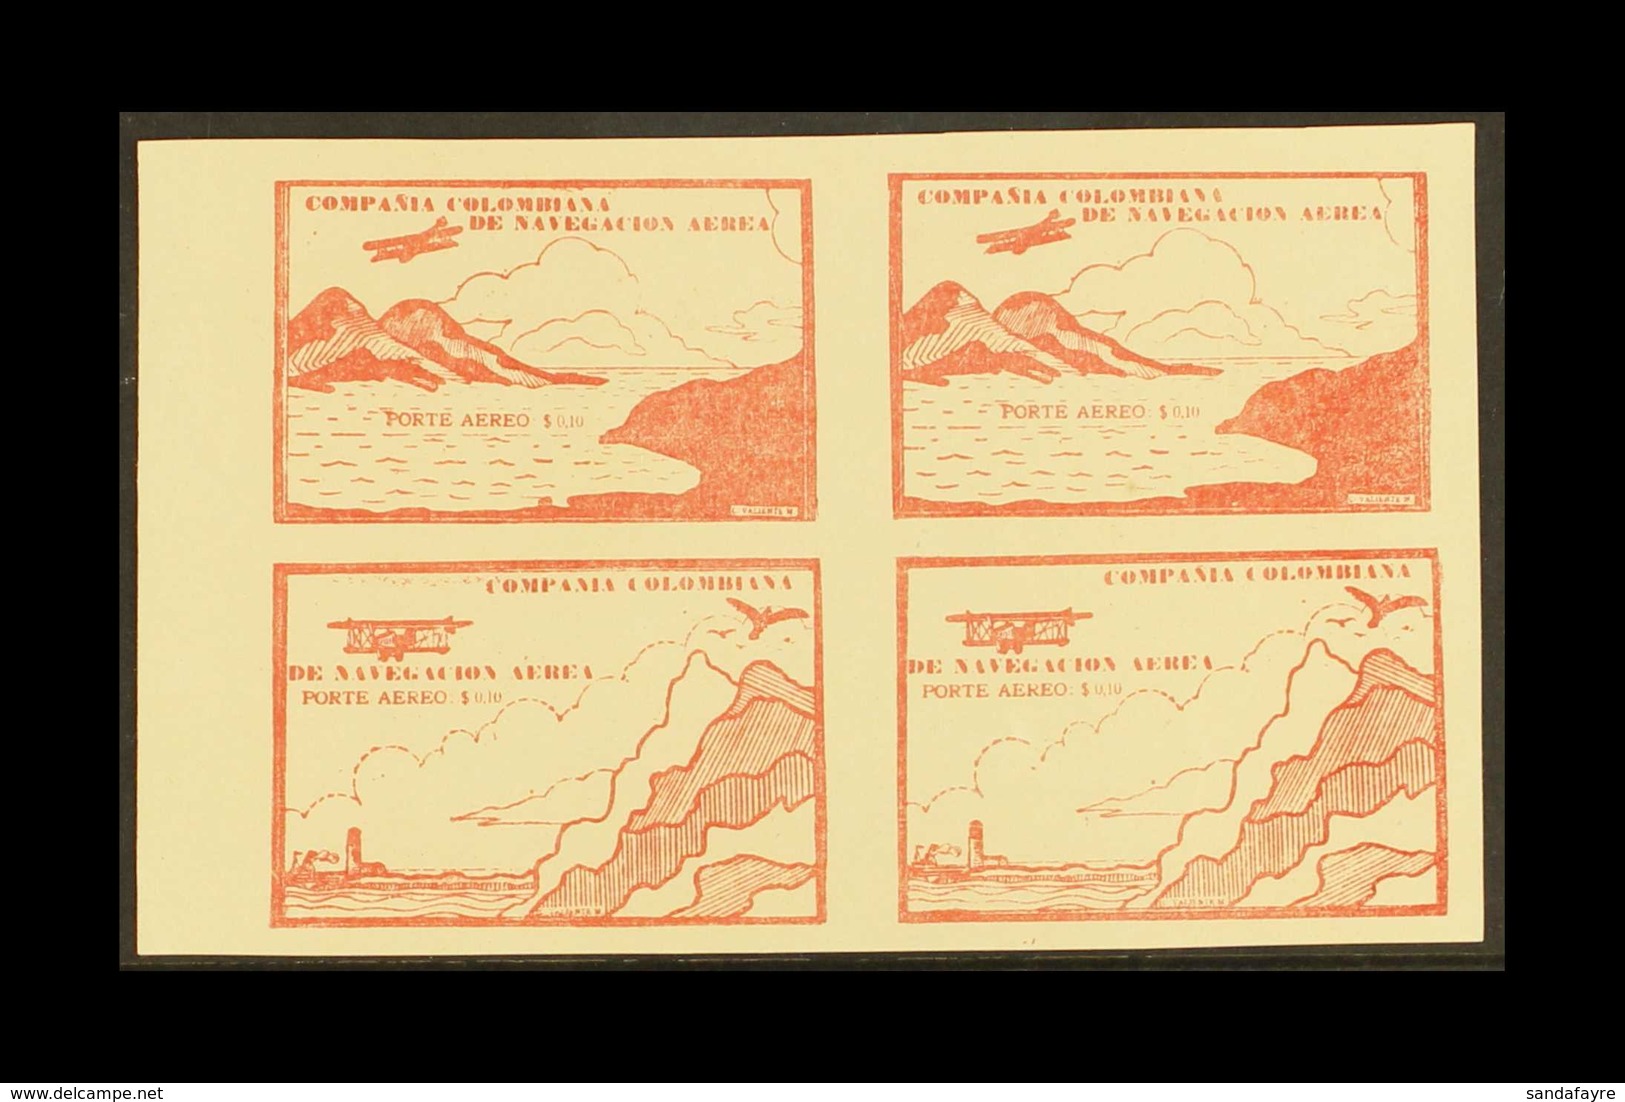 PRIVATE AIR COMPANY 1920 10c Brown Red, SG 13a/14a, Block Of 4, Types 3 & 4 Se-tenant Vertical Pairs, Unused & Without G - Colombia